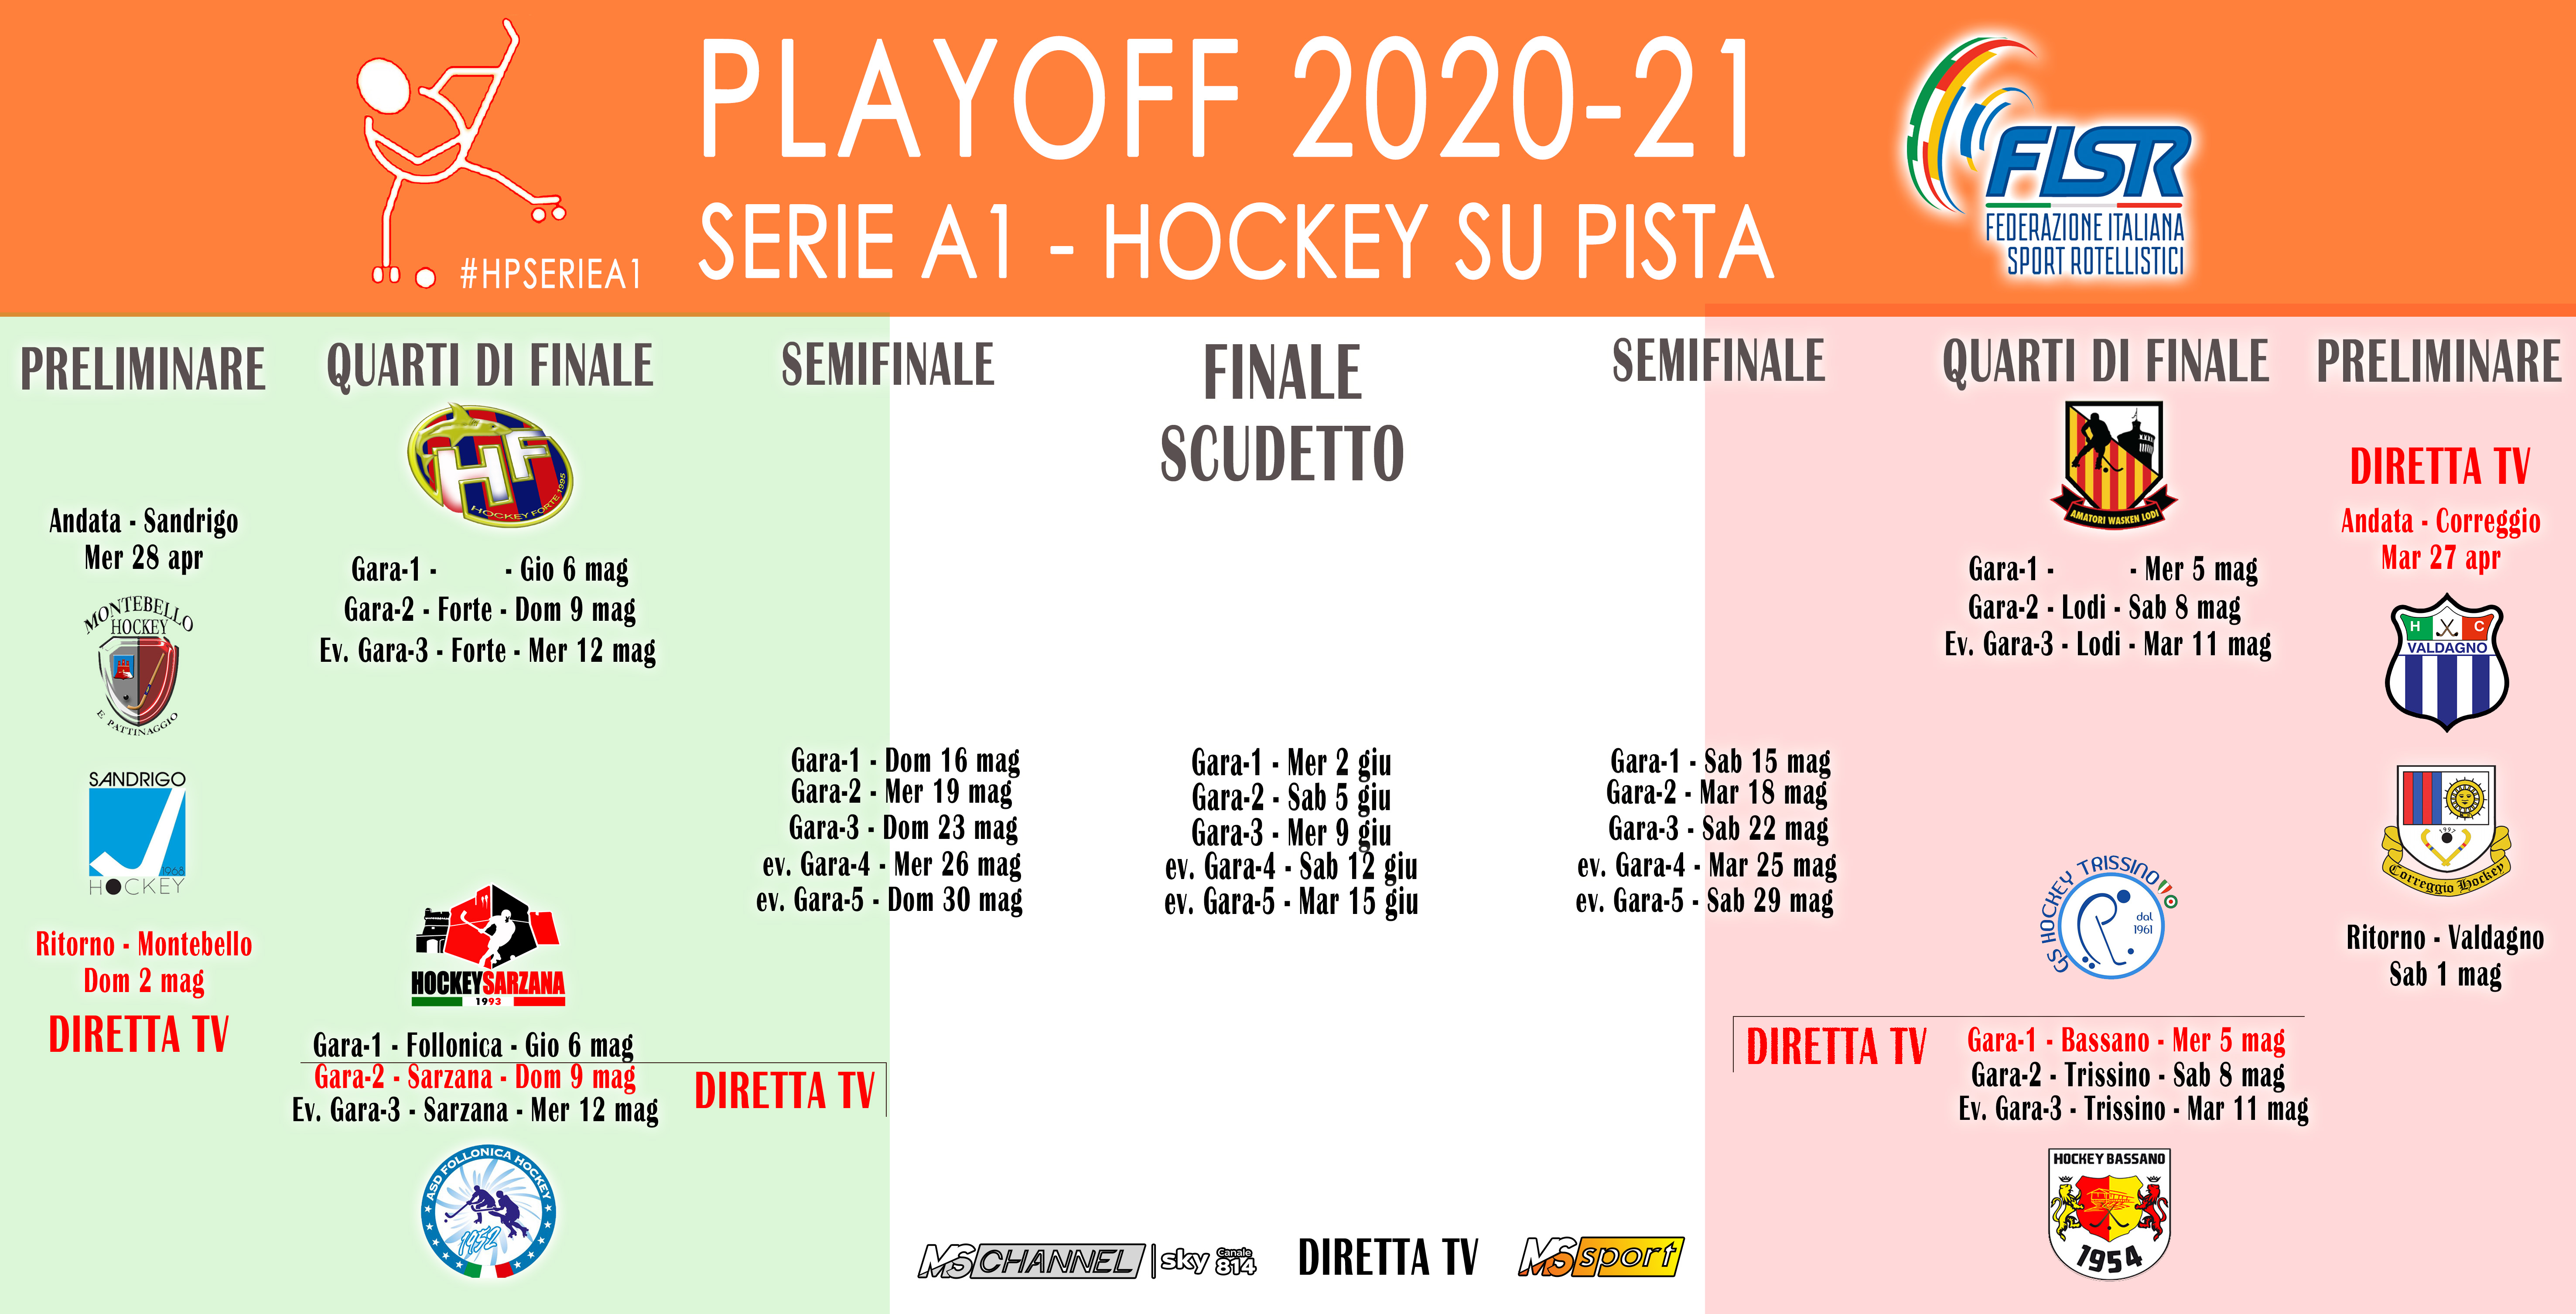 images/1-primo-piano/hp/2021/PLAYOFF2021.jpg